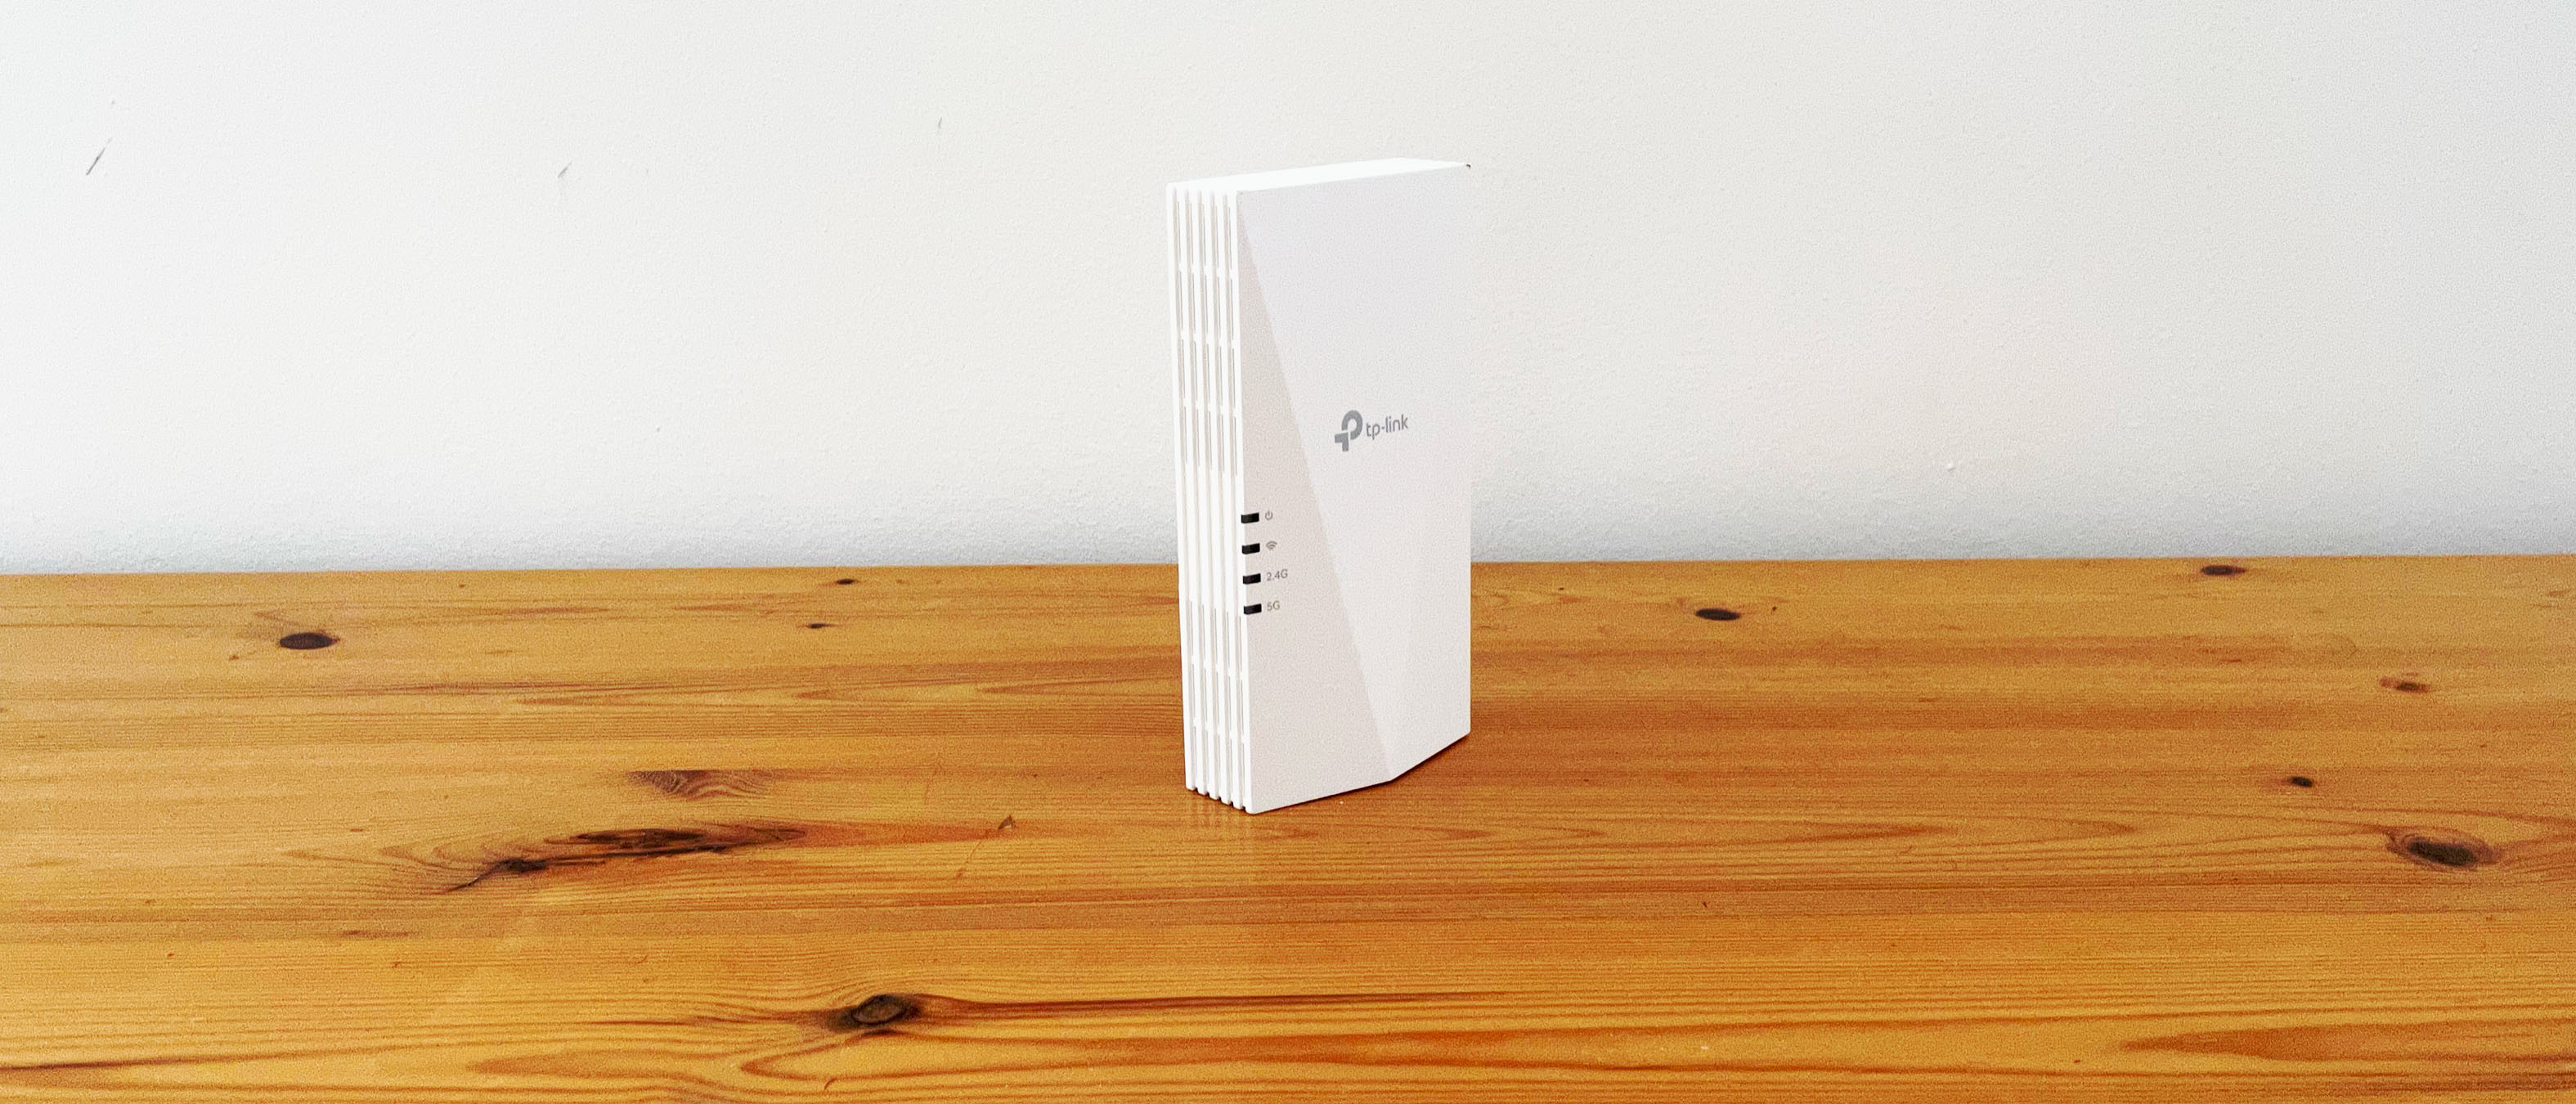 TP-Link RE715X Review: Versatile yet Limited